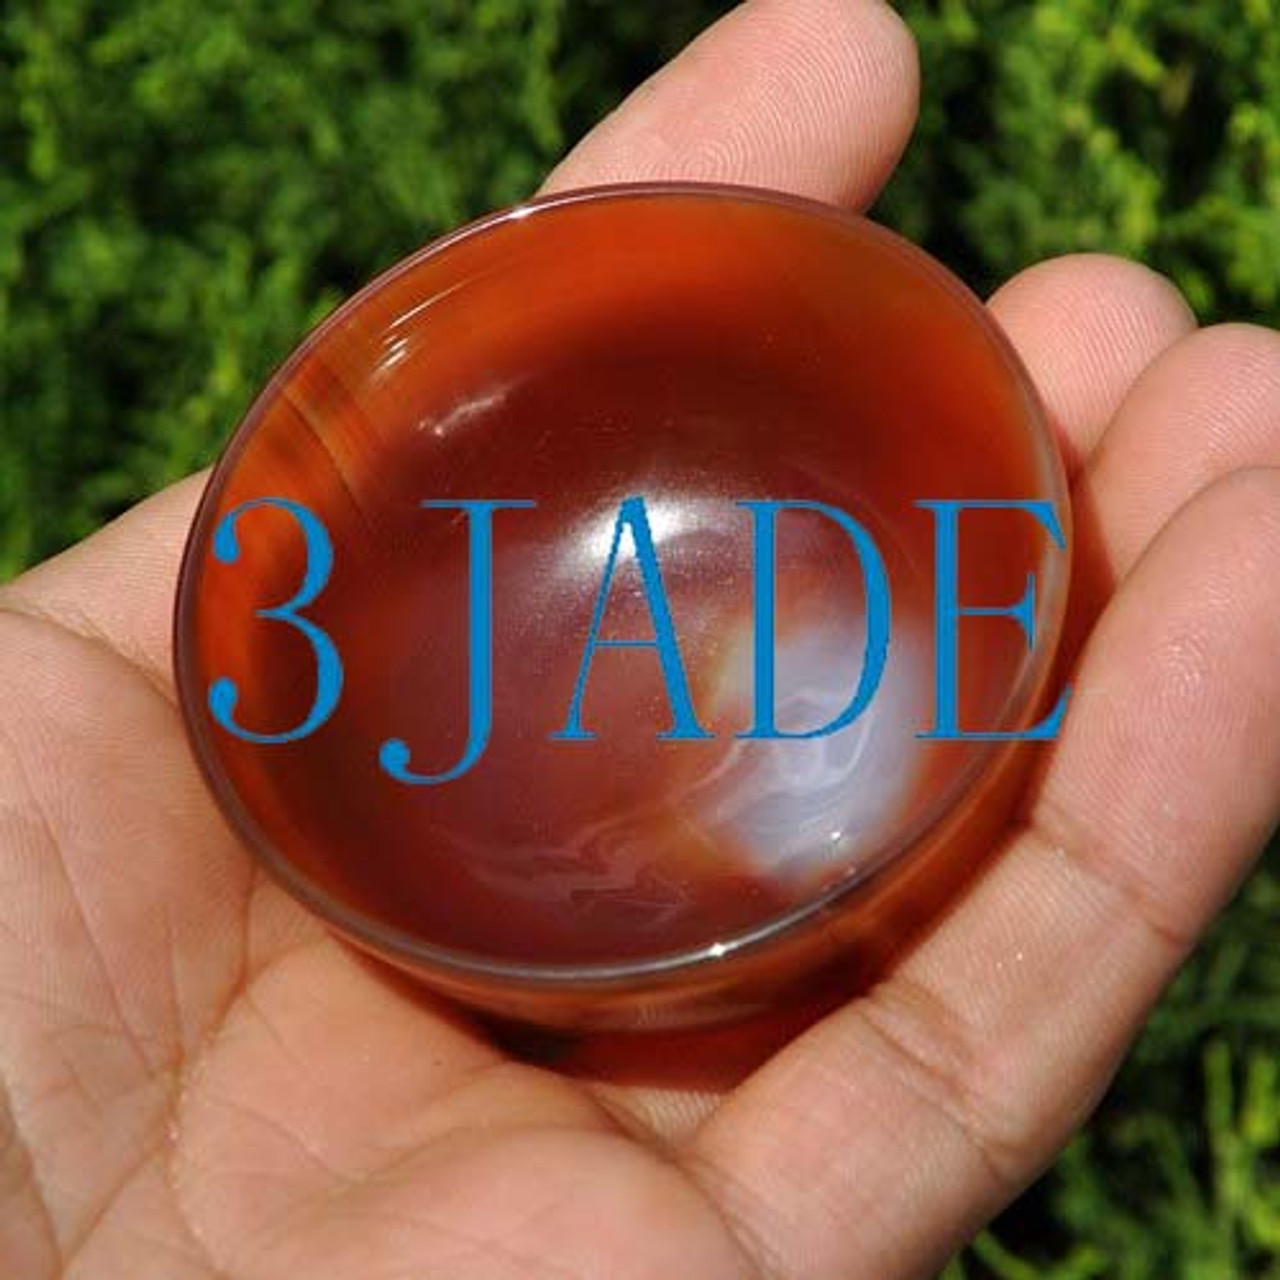 red agate bowl